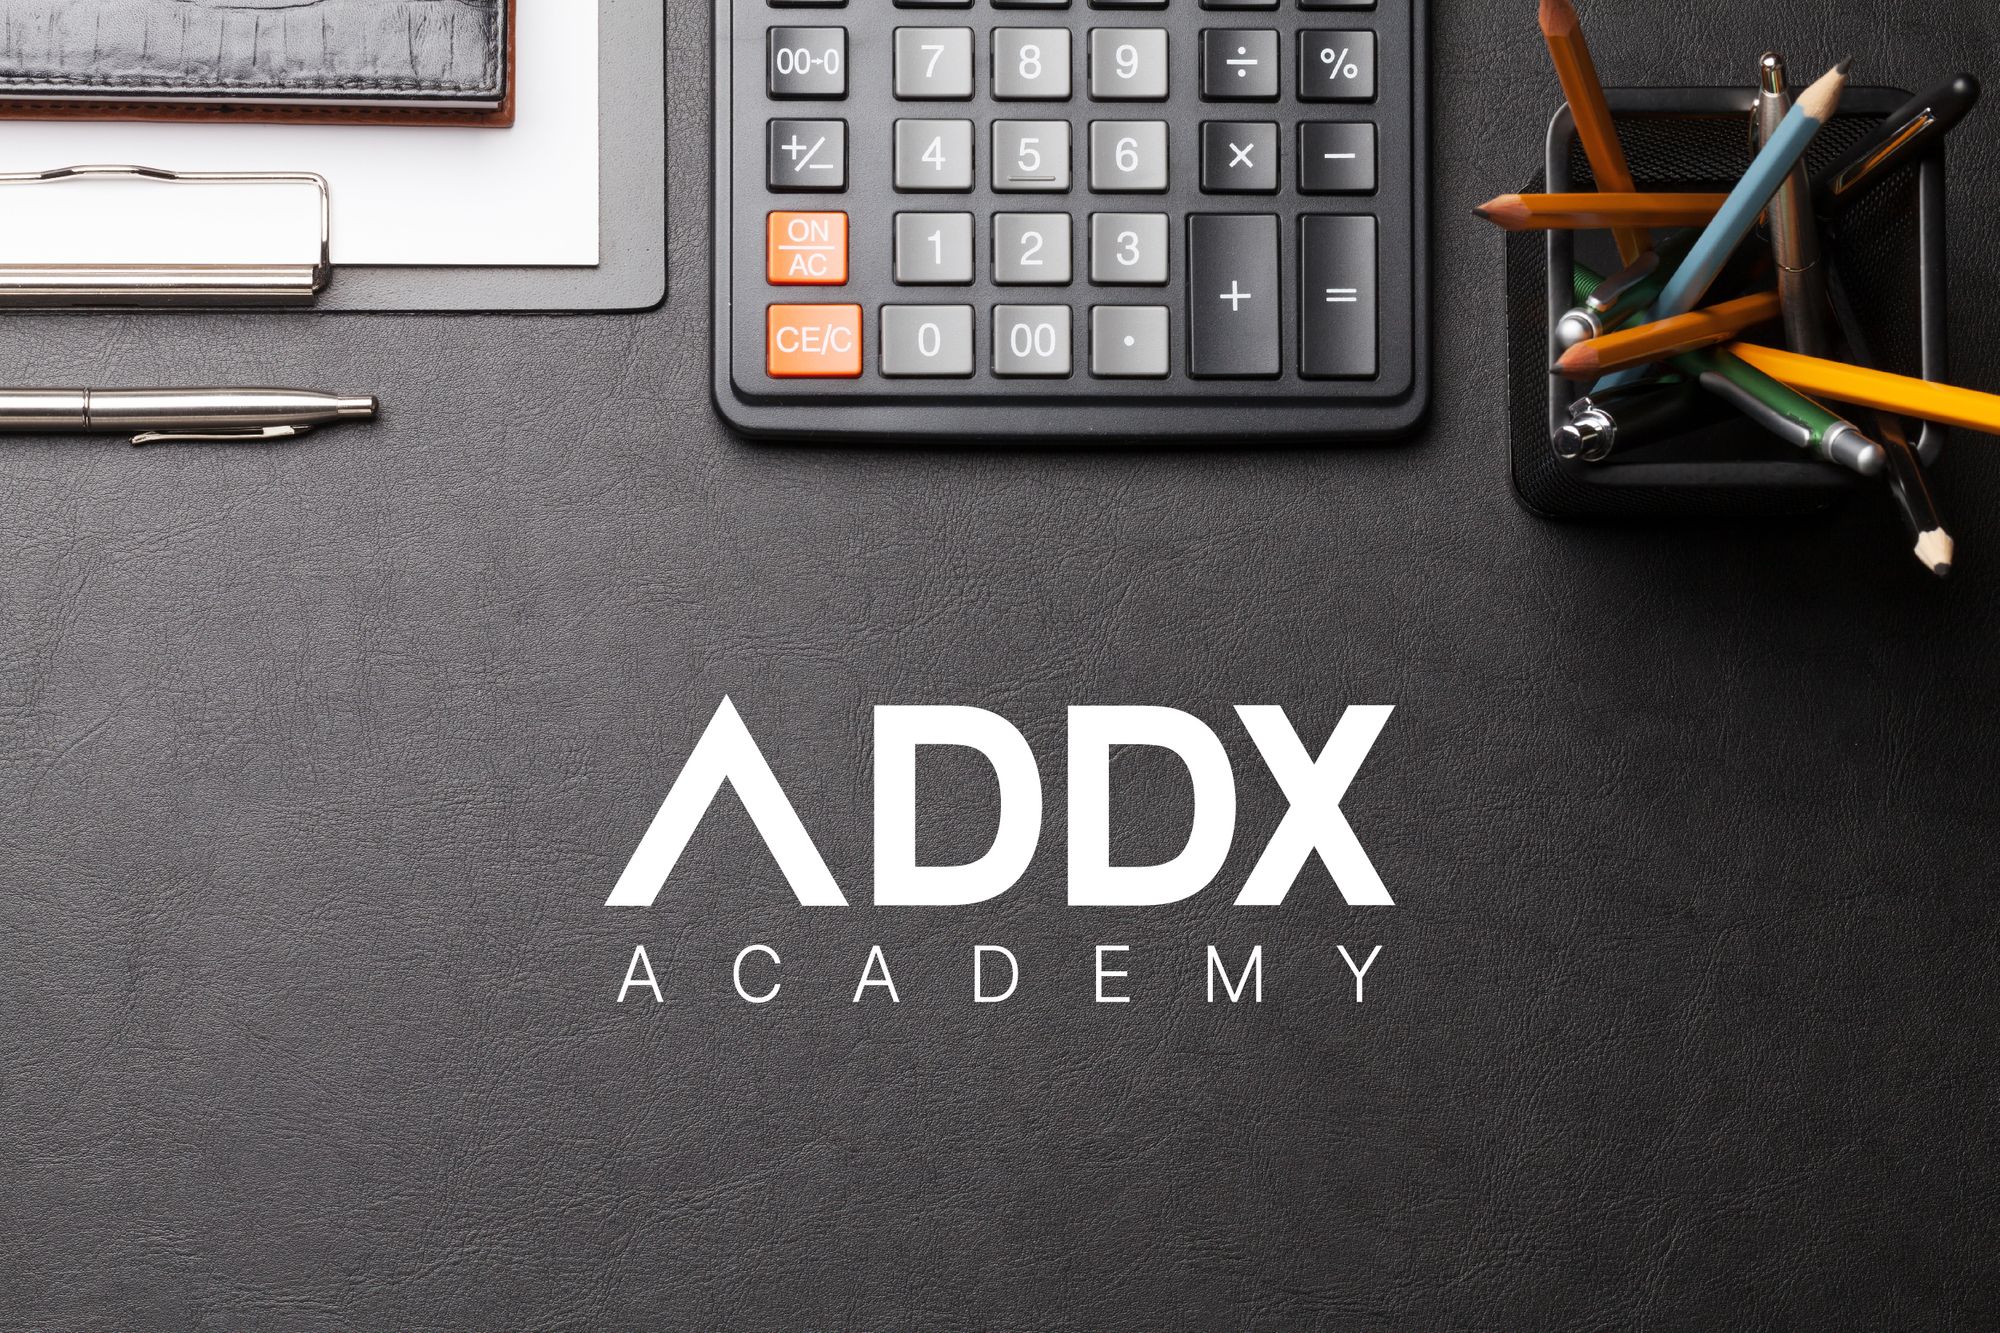 ADDX Academy: What Are Digital Securities/Security Tokens?